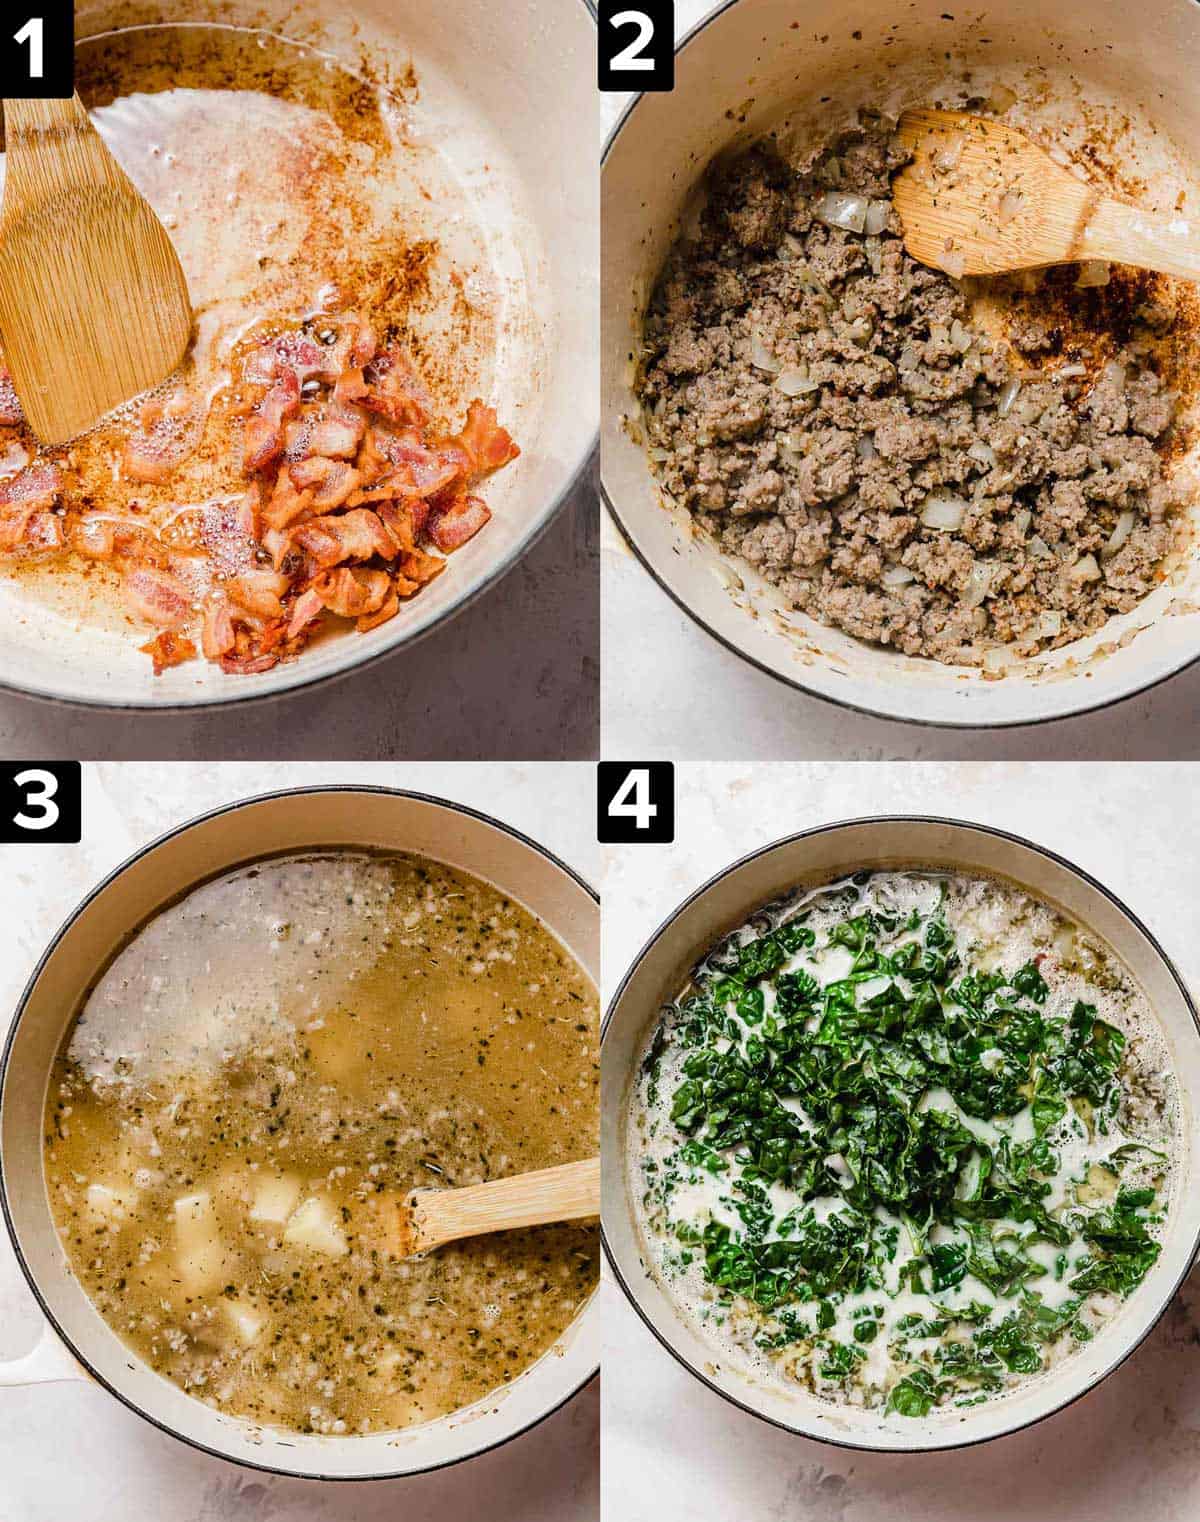 Four images showing how to make Olive Garden Zuppa Toscana Soup, top left has bacon in a white pot, top right has cooked sausage in a white pot, bottom left is potatoes and broth in a pot, bottom right has chopped kale in the soup.